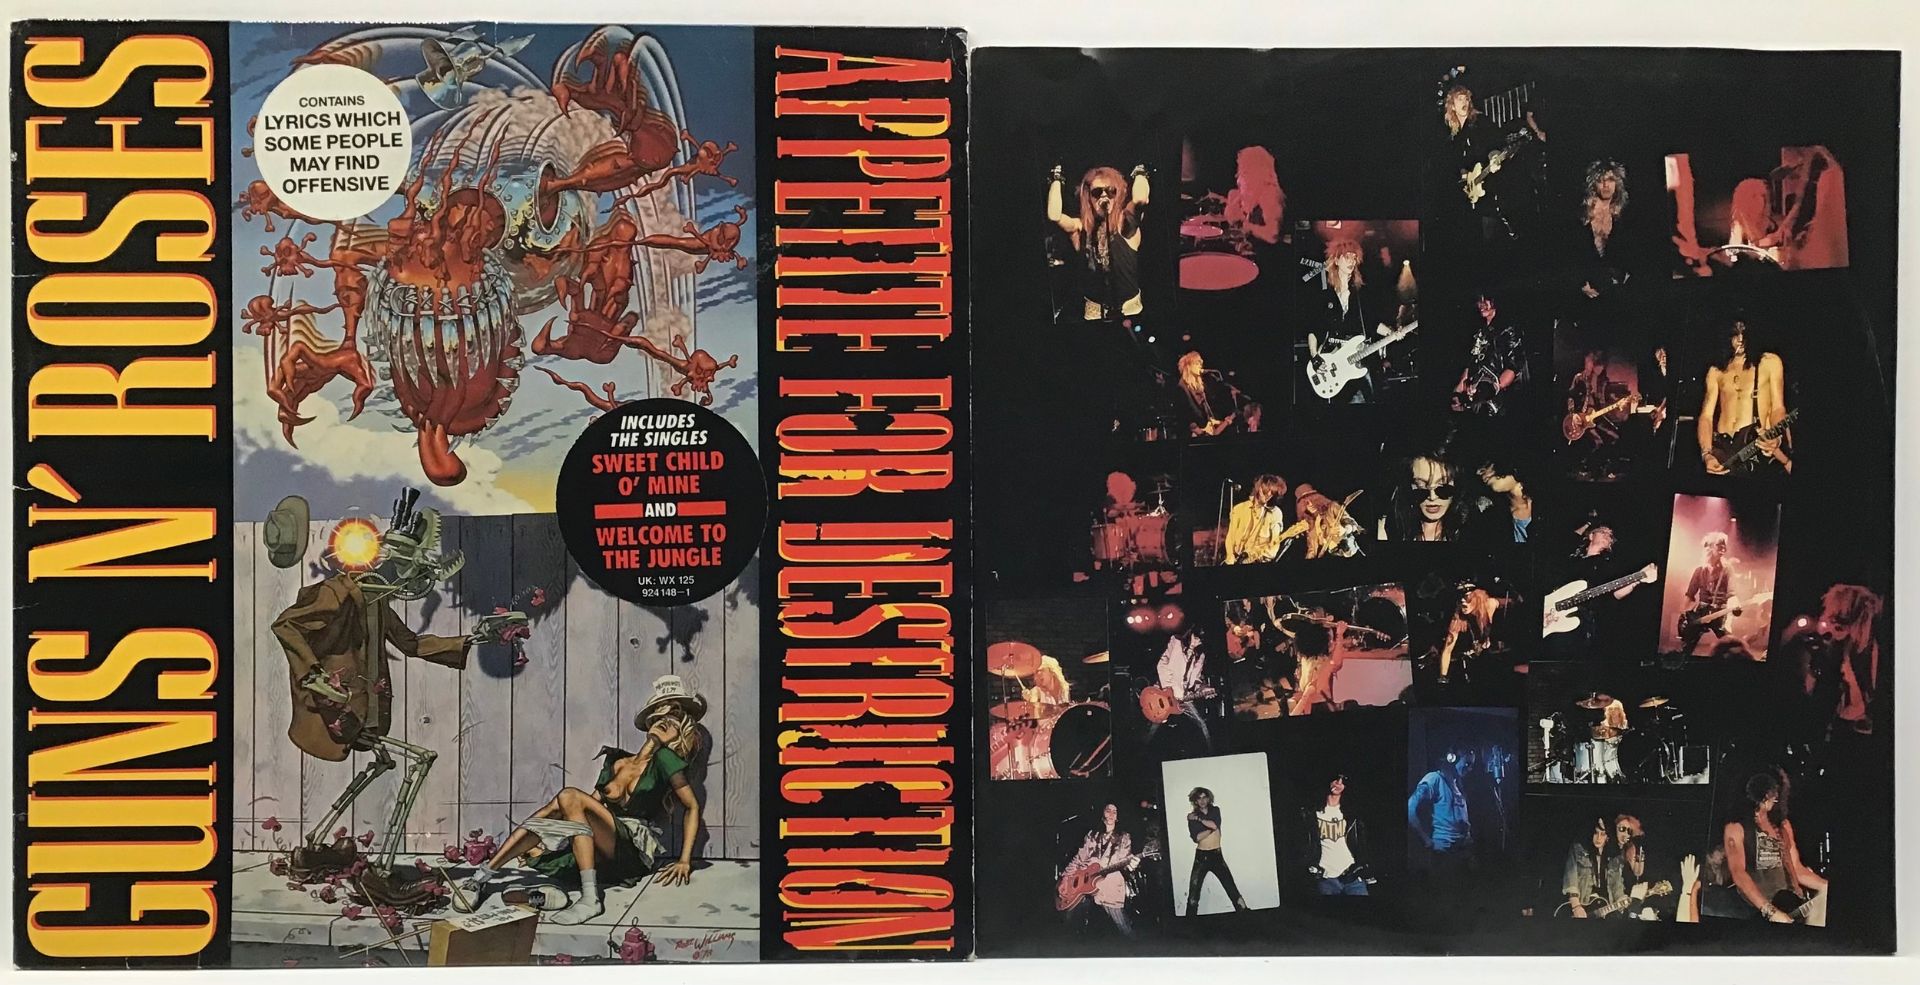 GUNS N' ROSES "APPETITE FOR DESTRUCTION" LP. Released on Geffen Records WX 125 in 1987 and found